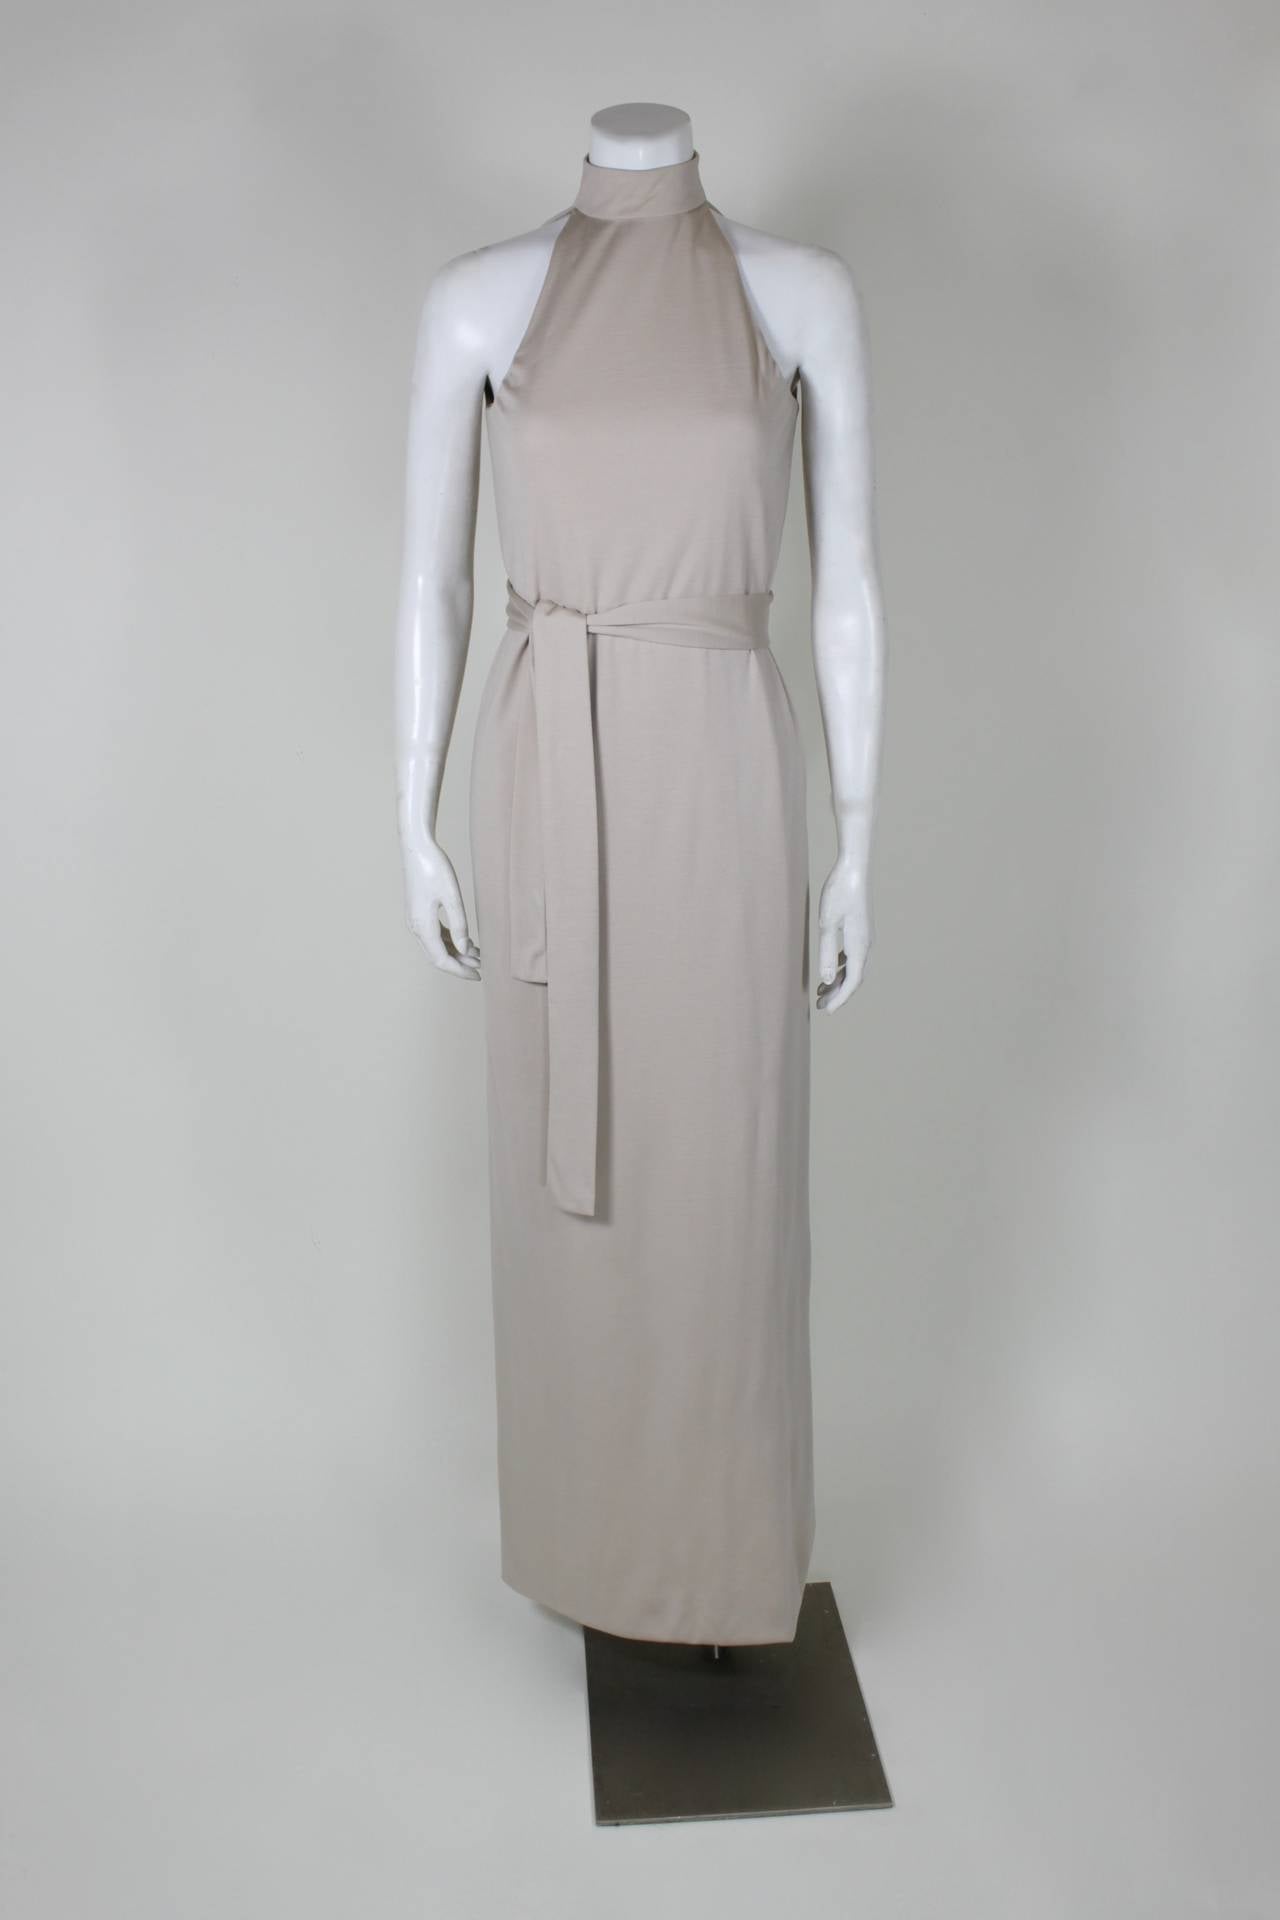 Renowned for the elegance and simplicity of his designs, this gown from legendary American designer Norman Norell is made of luxurious cream wool. Done in a simple belted column silhouette with a halter turtle-neck. The gown features a sexy cutout